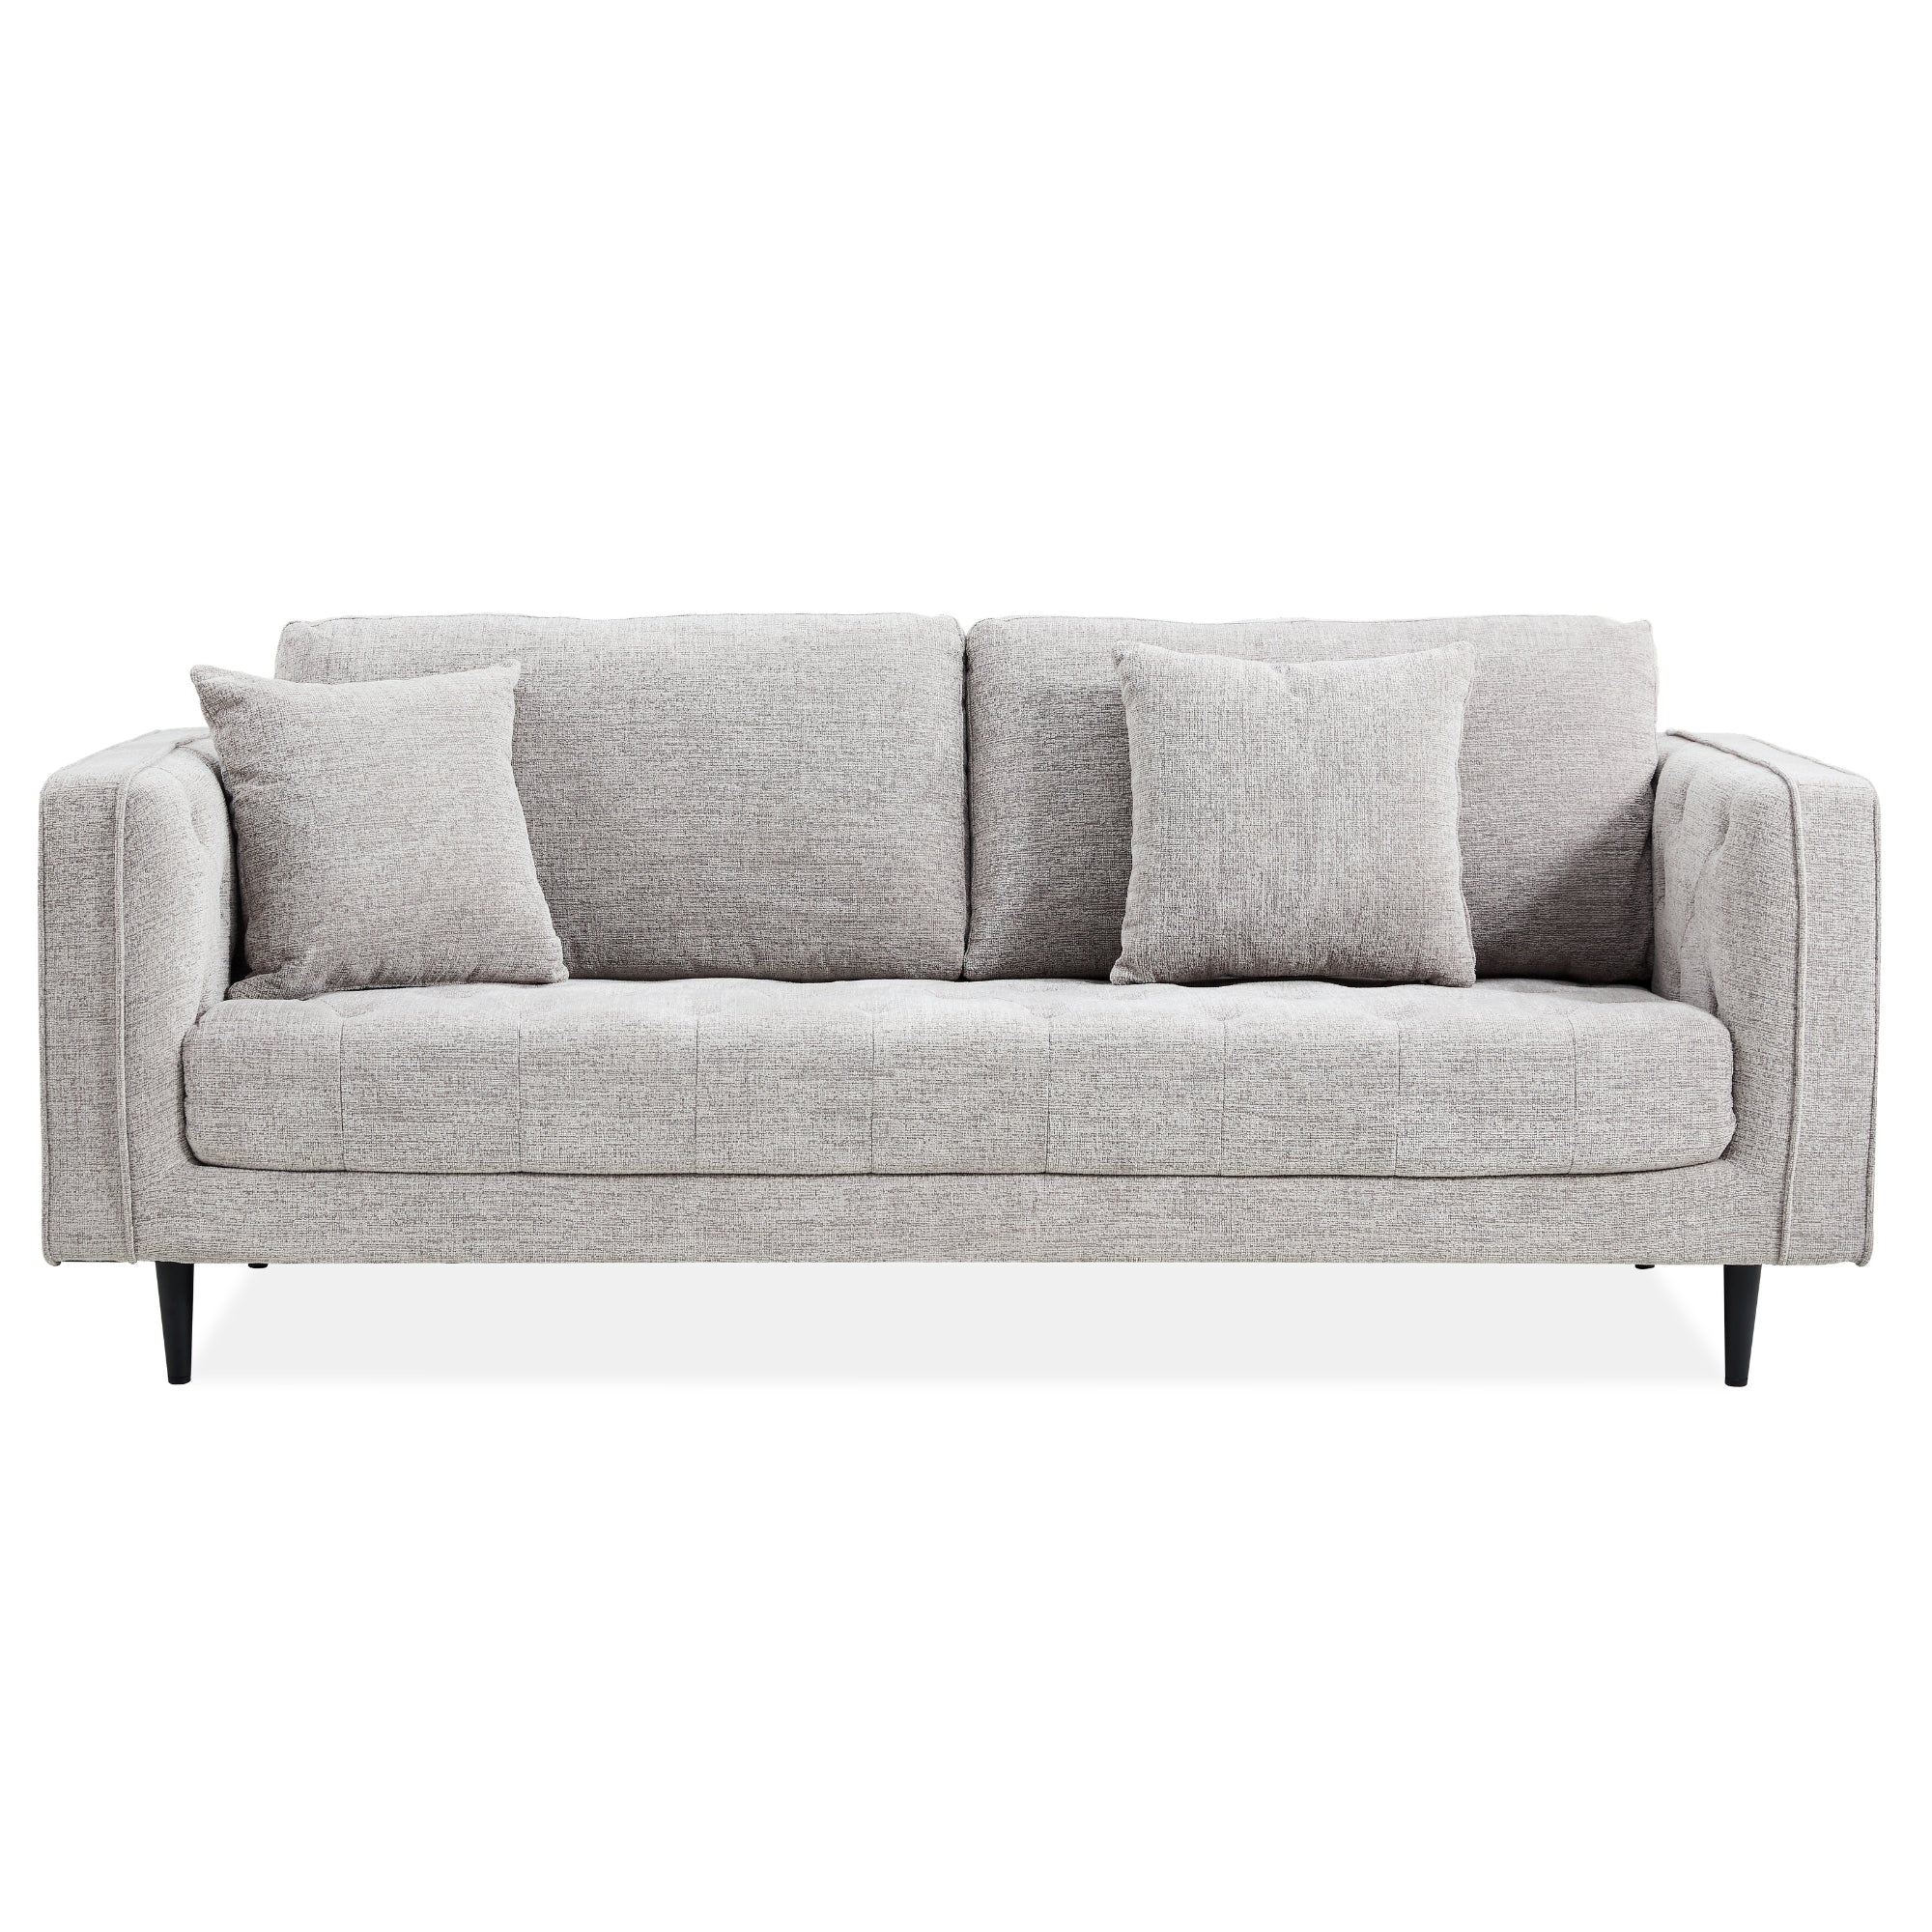 Durable 3-Seater Sofa, Quartz Fabric Upholstery, French Style